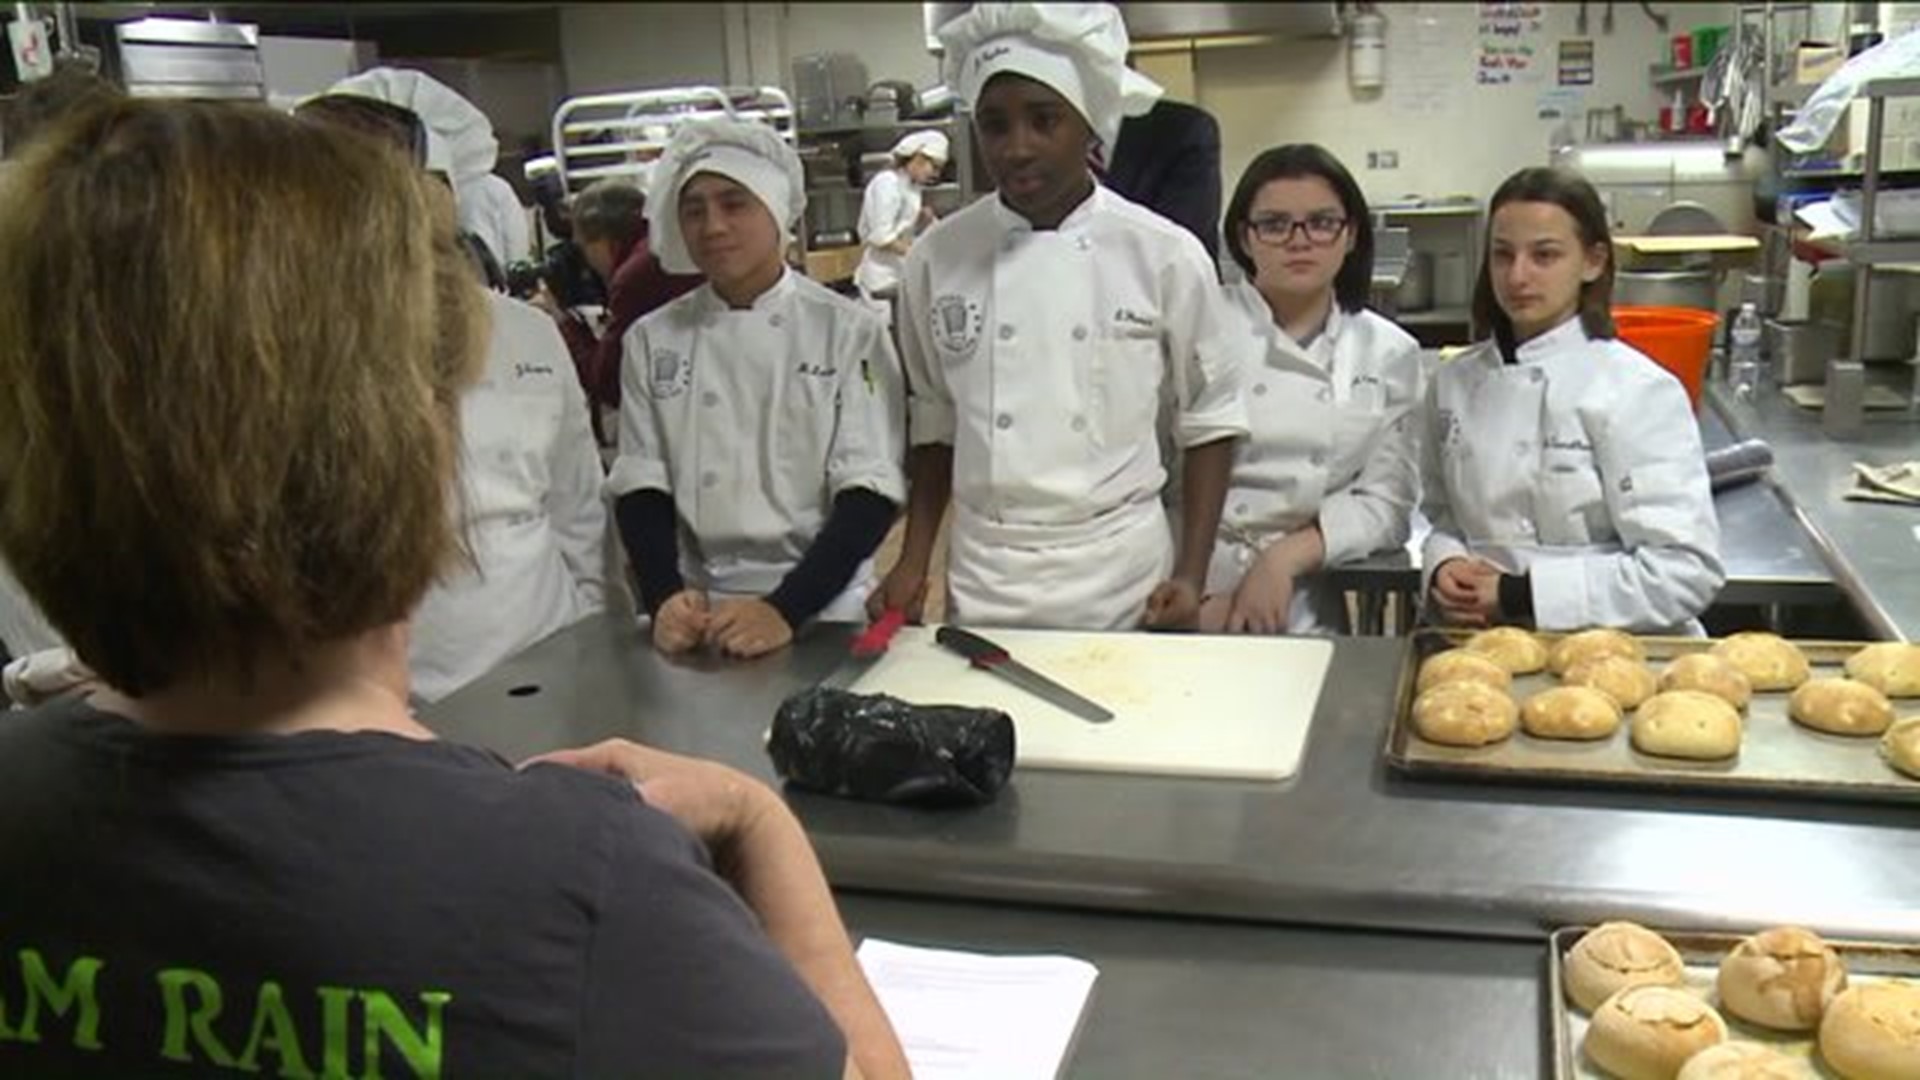 TV star teaches kids how to cook in a restaurant